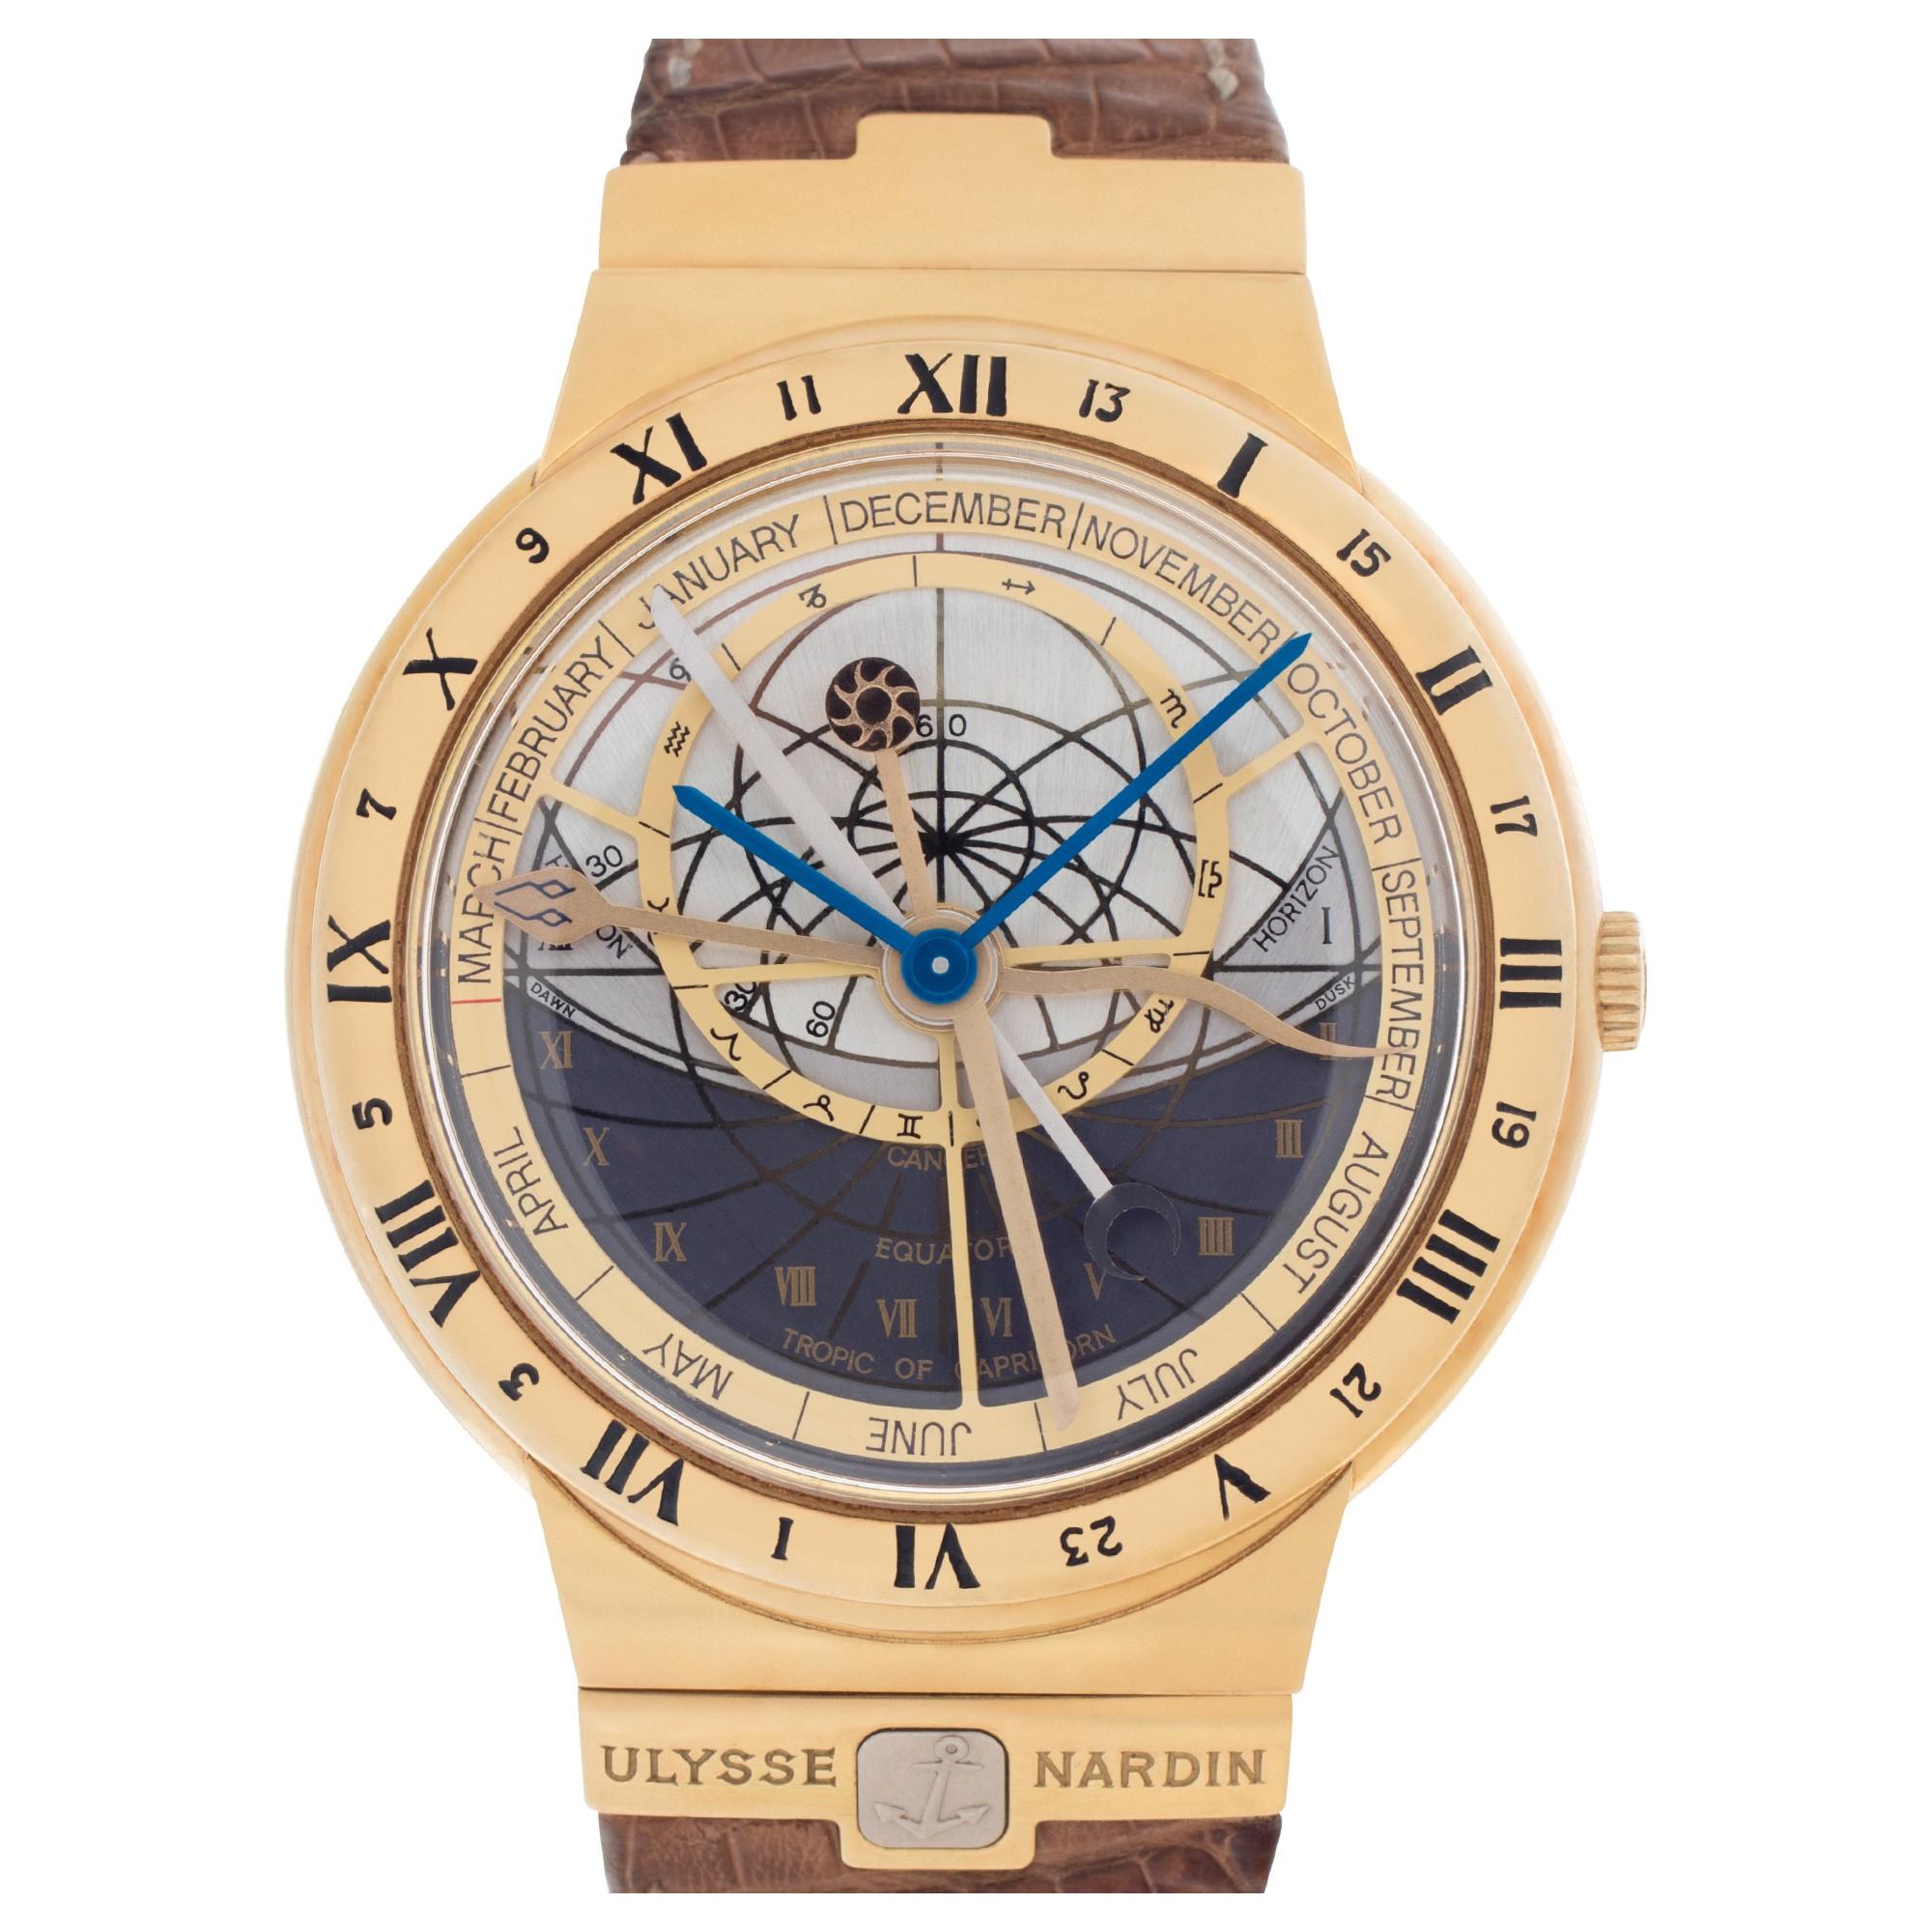 YOUR PRICE: $26,768


Ulysse Nardin Astrolabium Galileo Galilei in 18k on leather strap with 18k UN tang buckle. Complications including time of day, moon phases, moon rise and set, sunrise and sunset, dawn, dusk, signs of the Zodiac, perpetual